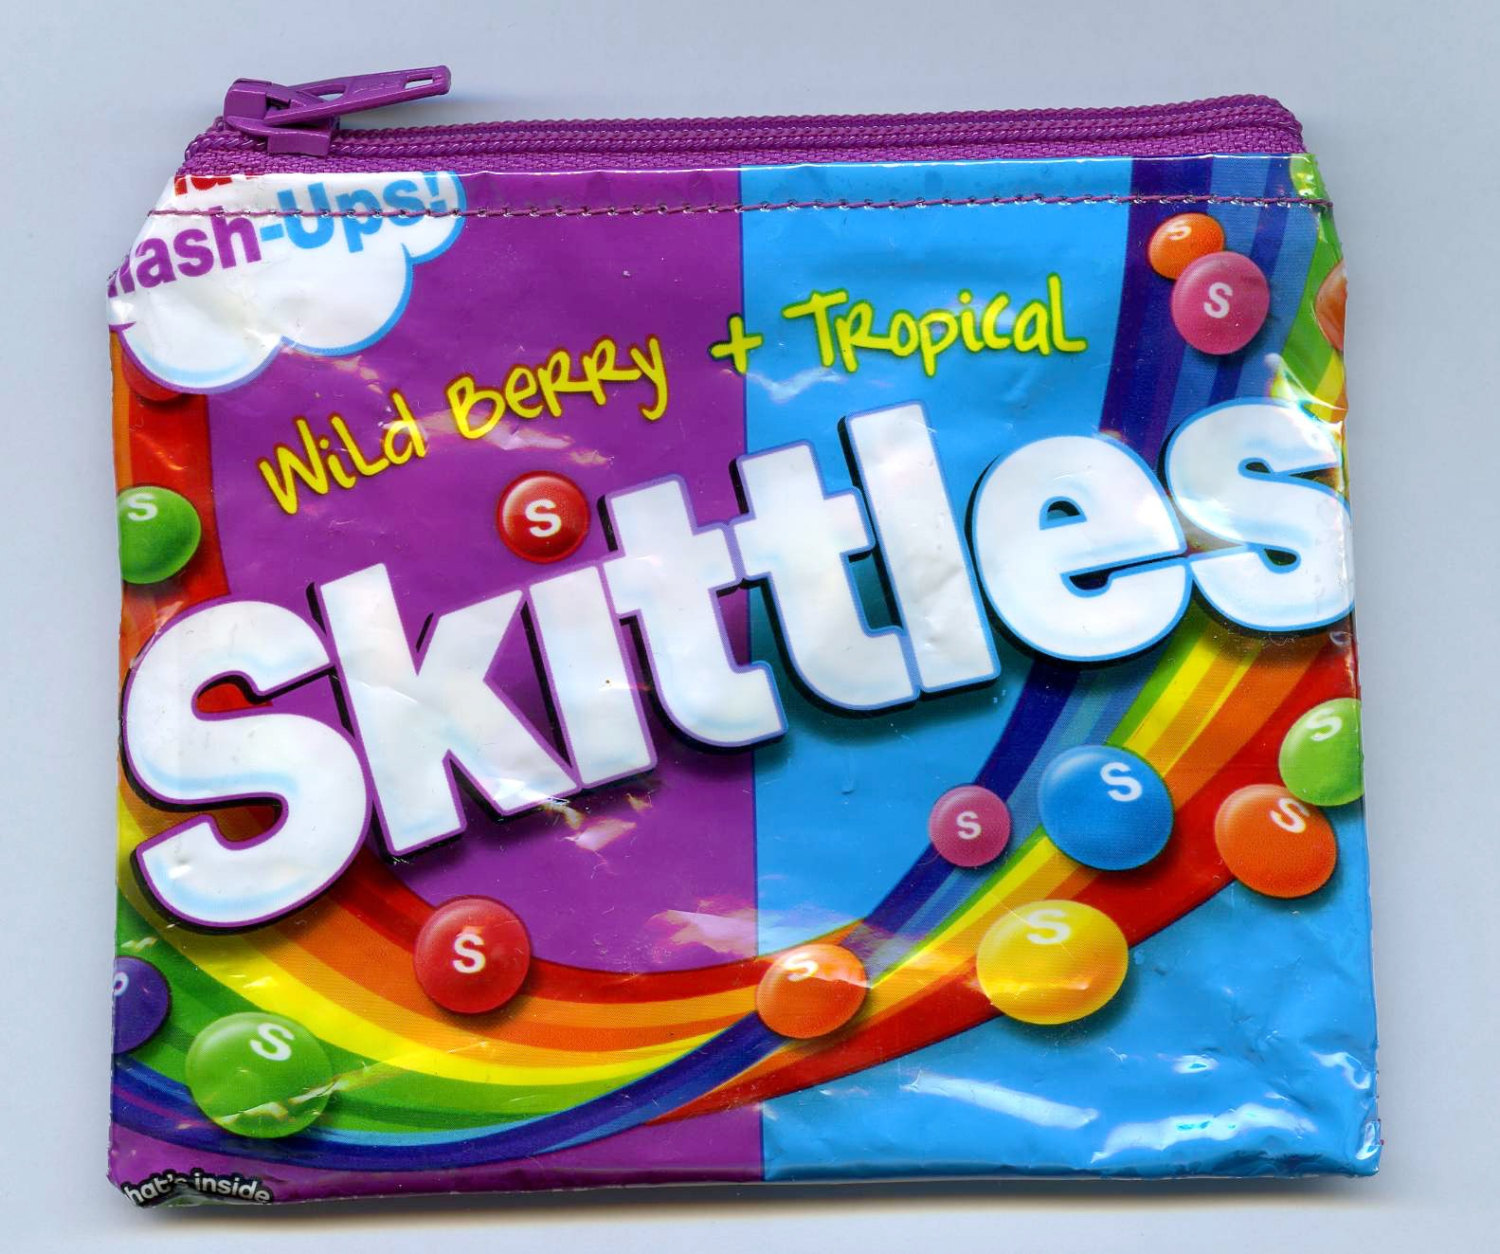 Download New Skittles Coin Purse Up-cycled Candy Wrapper